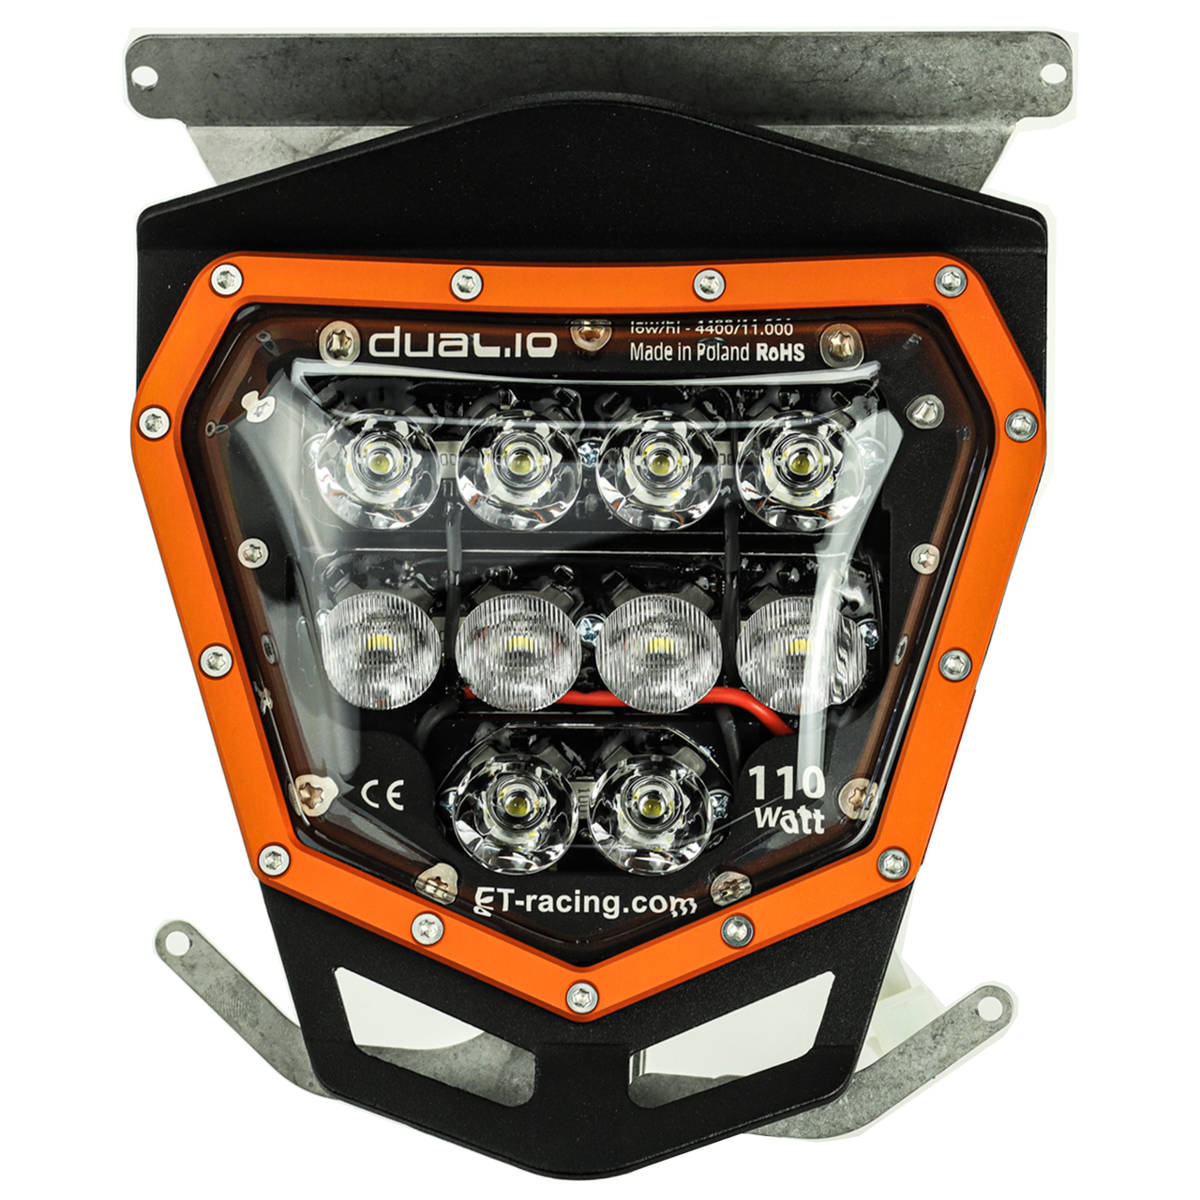 【KTM】LED lamp Headlight Dual.10 KTM 690 2012-2016 only FUEL INJECTION engine. Extra Terrestrial 11000 lumens